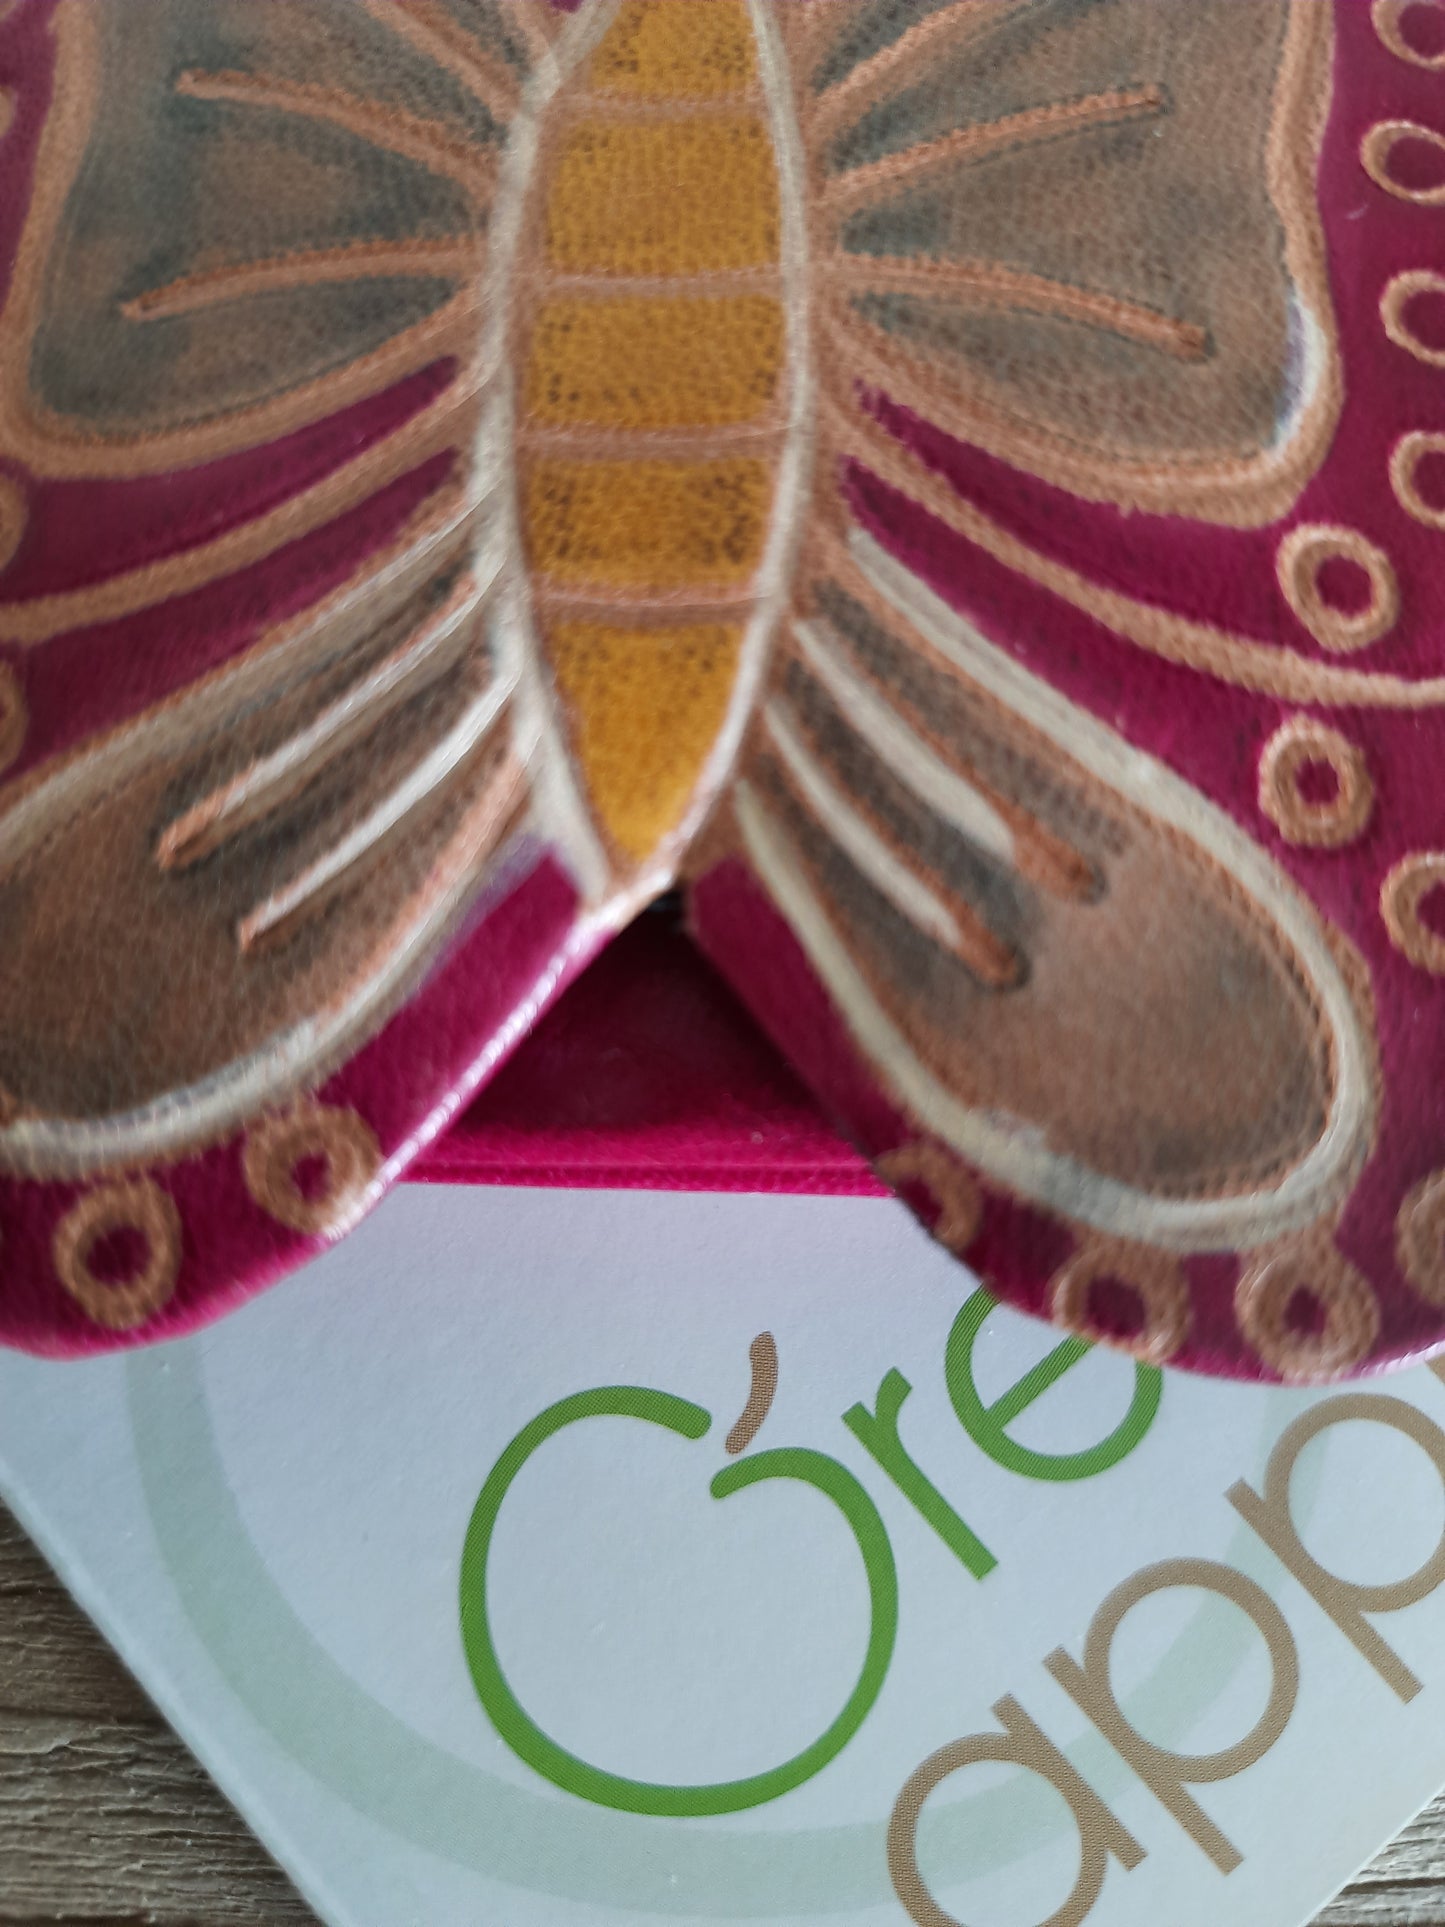 Butterfly Purse | Fair Trade Examples | Leather | Shop Ethical | Eco Friendly Companies